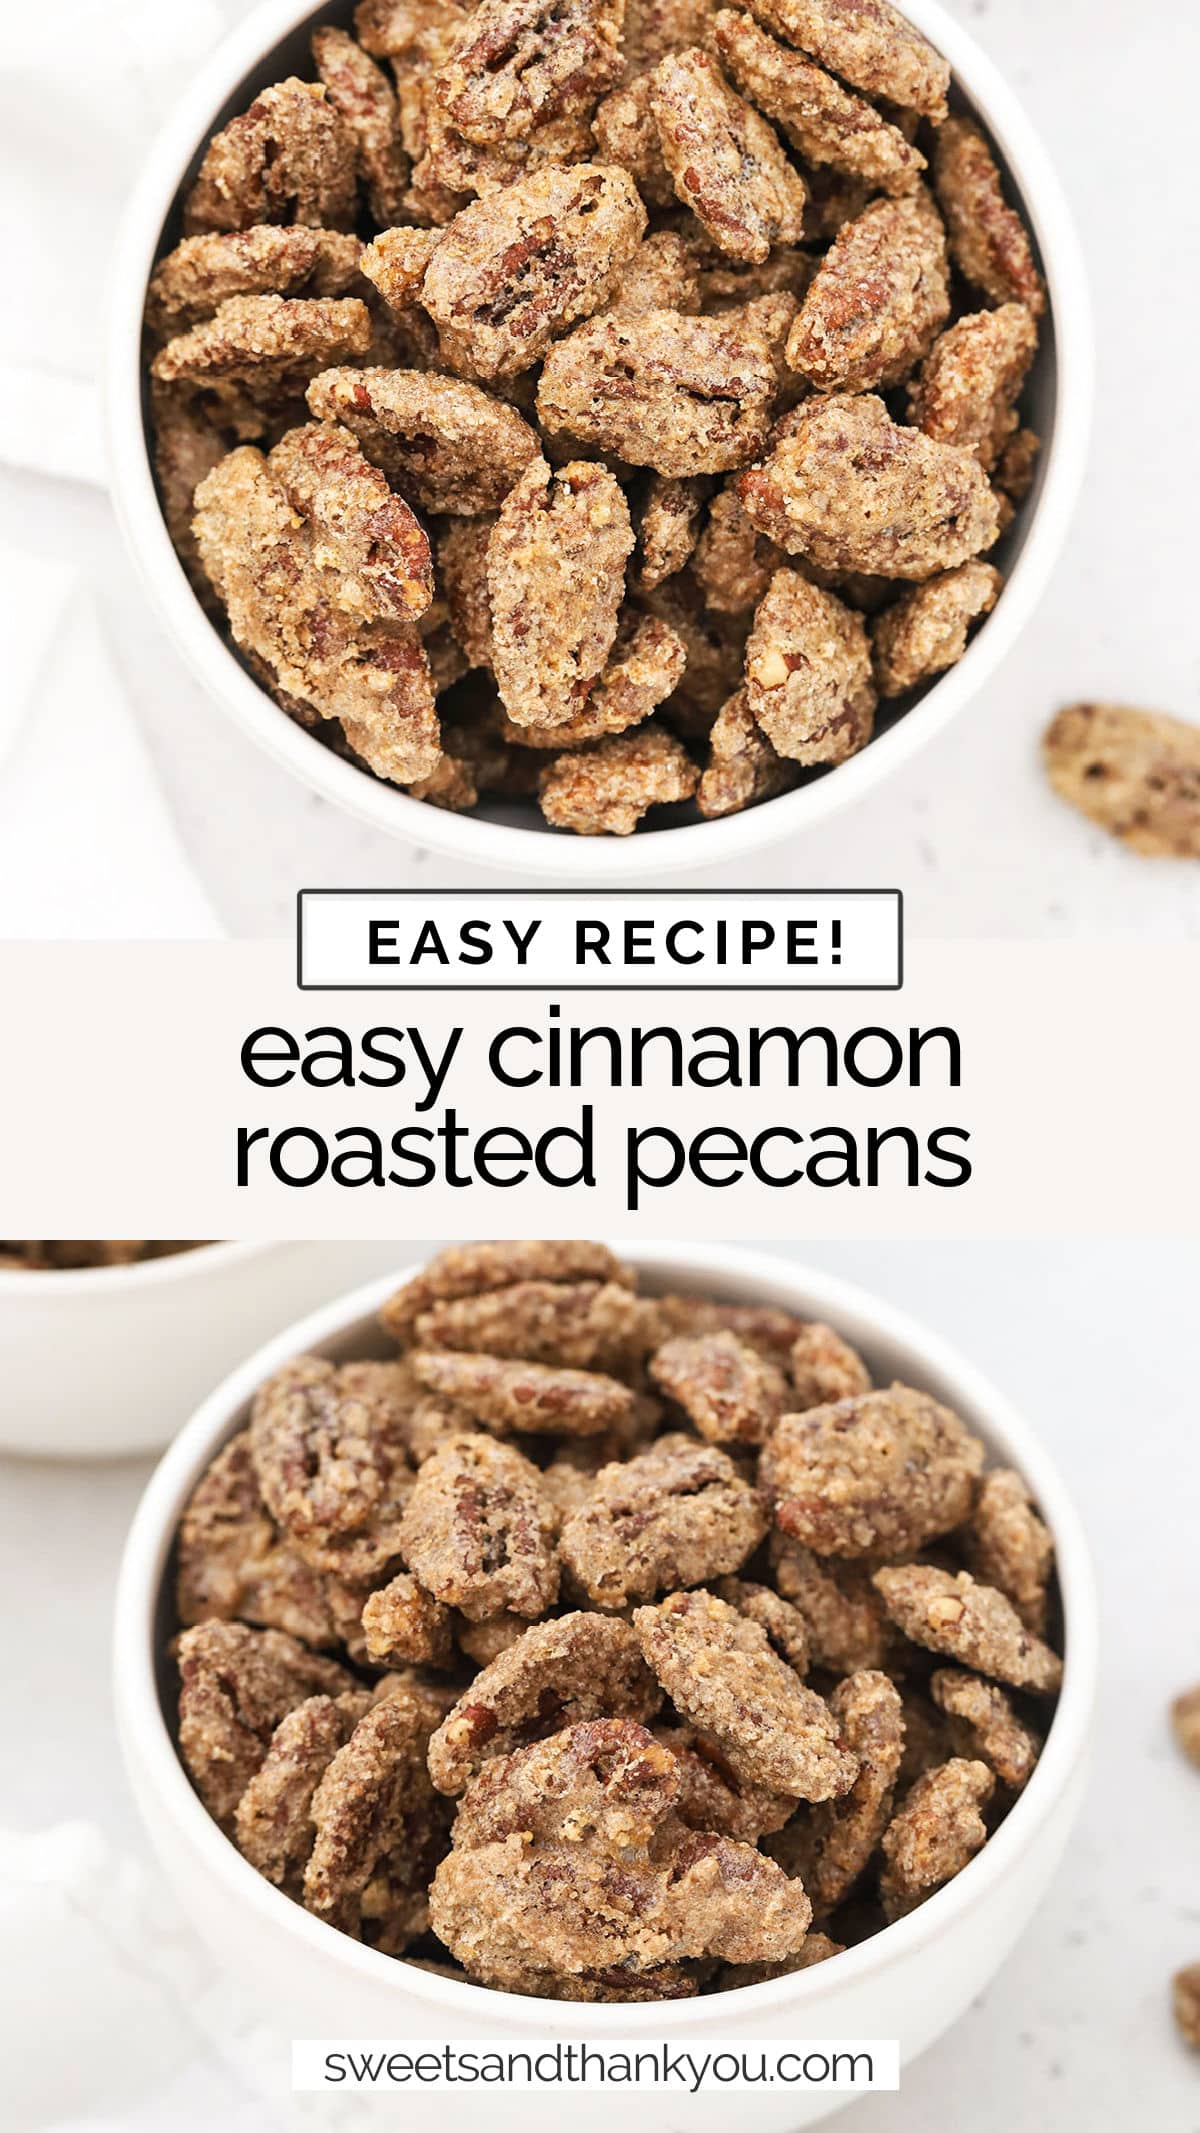 Our old-fashioned cinnamon roasted pecans recipe is so easy to make! You only need 6 ingredients and a few minutes to get started! homemade cinnamon pecans / cinnamon sugar pecans recipe / cinnamon sugar candied pecans / roasted cinnamon pecans / cinnamon sugar roasted pecans /